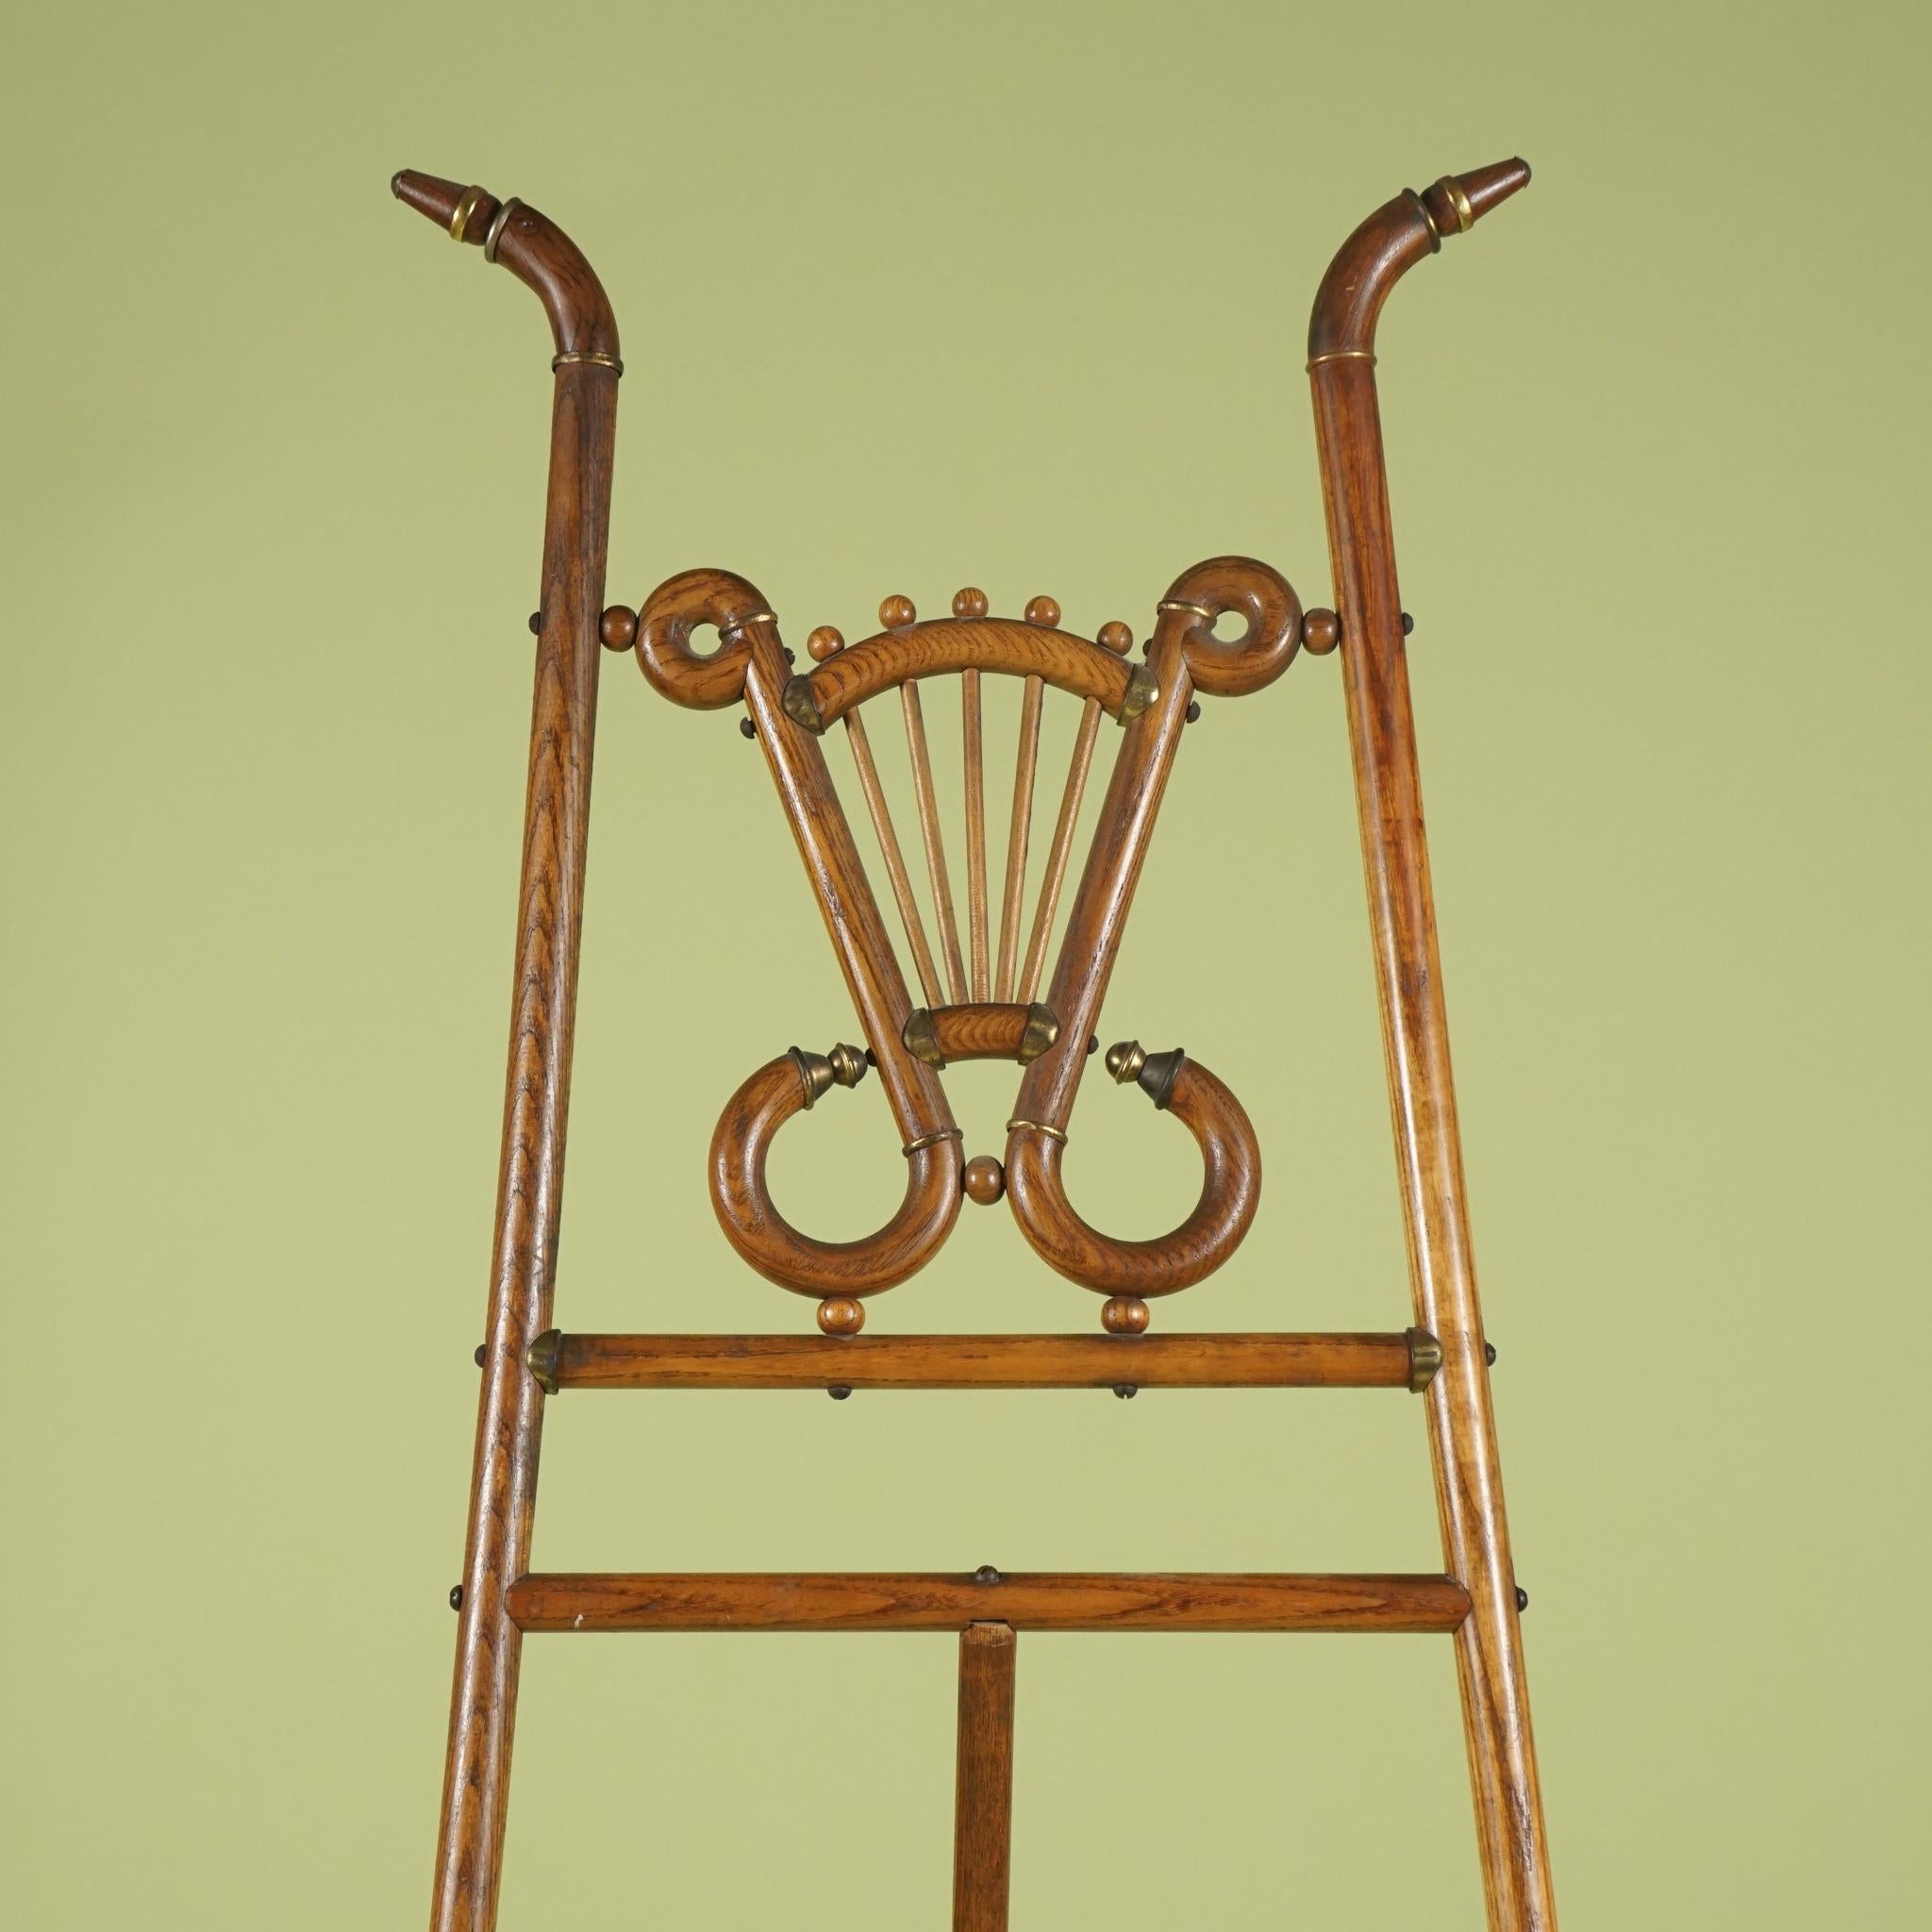 This rare surviving Aesthetic Movement easel comes from the estate of the renowned Sir John Richardson and can be seen in the book published regarding his homes and life. Crafted by the firm Ferguson Brothers of New York which was established in